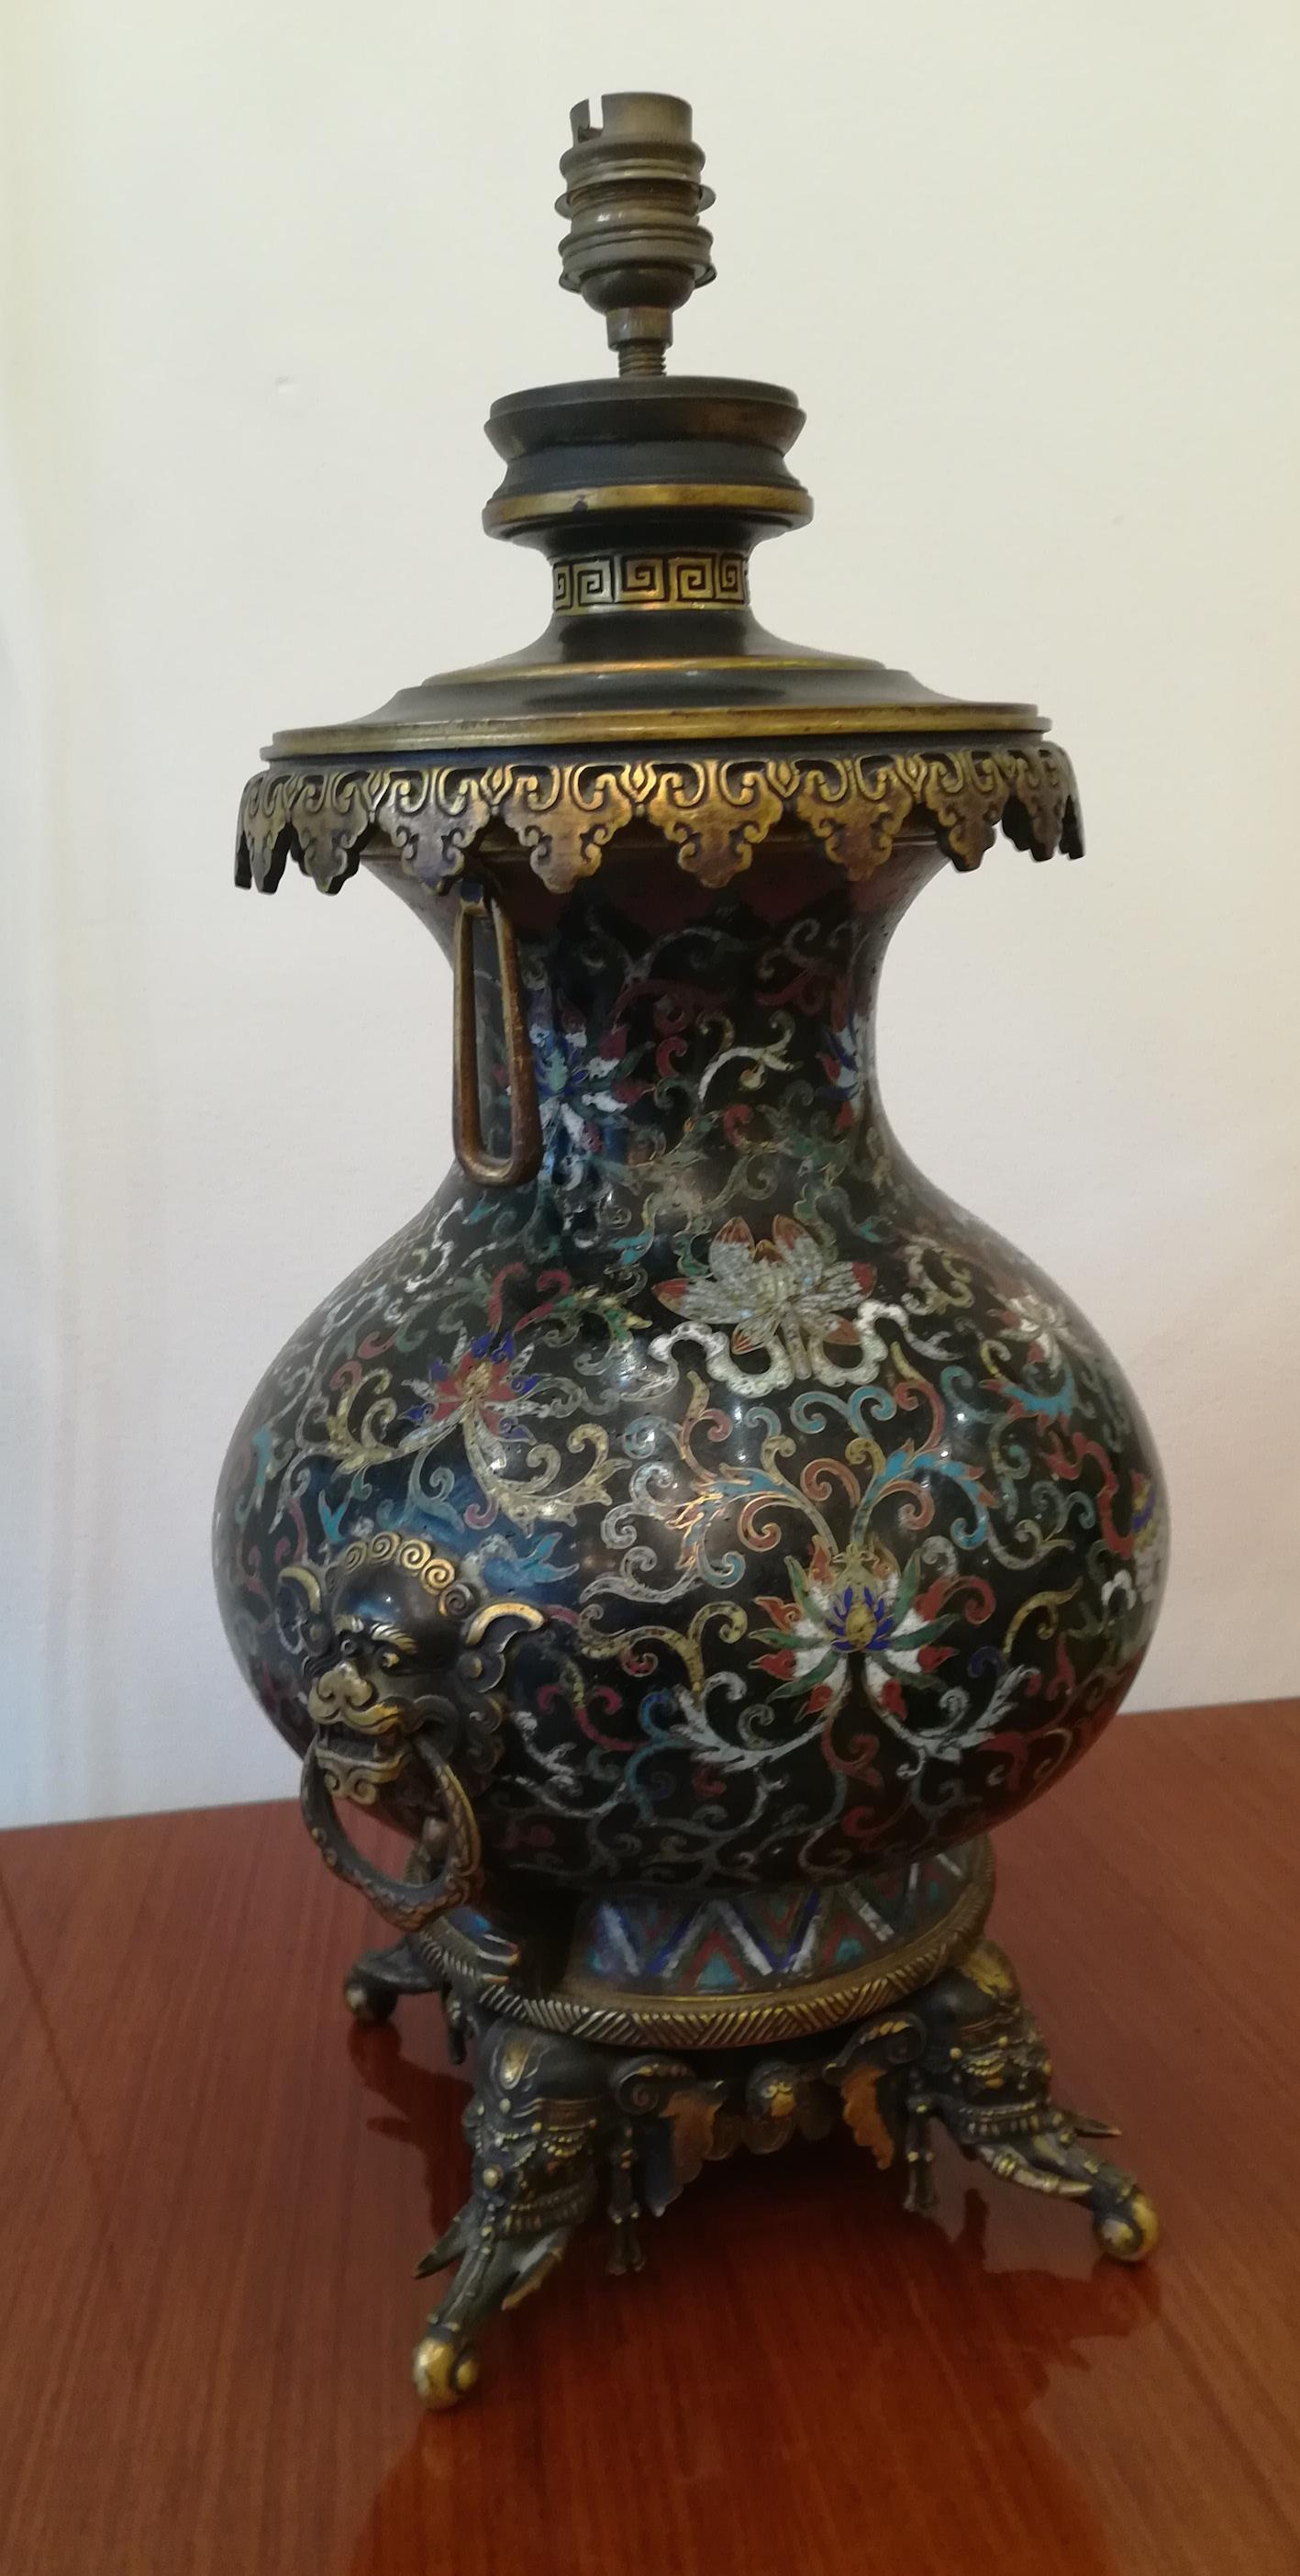 Baluster shaped lamp made from a Chinese cloisonné enamel vases late 18th-early 19th century, it is a French realization of the prestigious Barbedienne house dating from the late nineteenth century. The work, the decor and the carving of the Paris